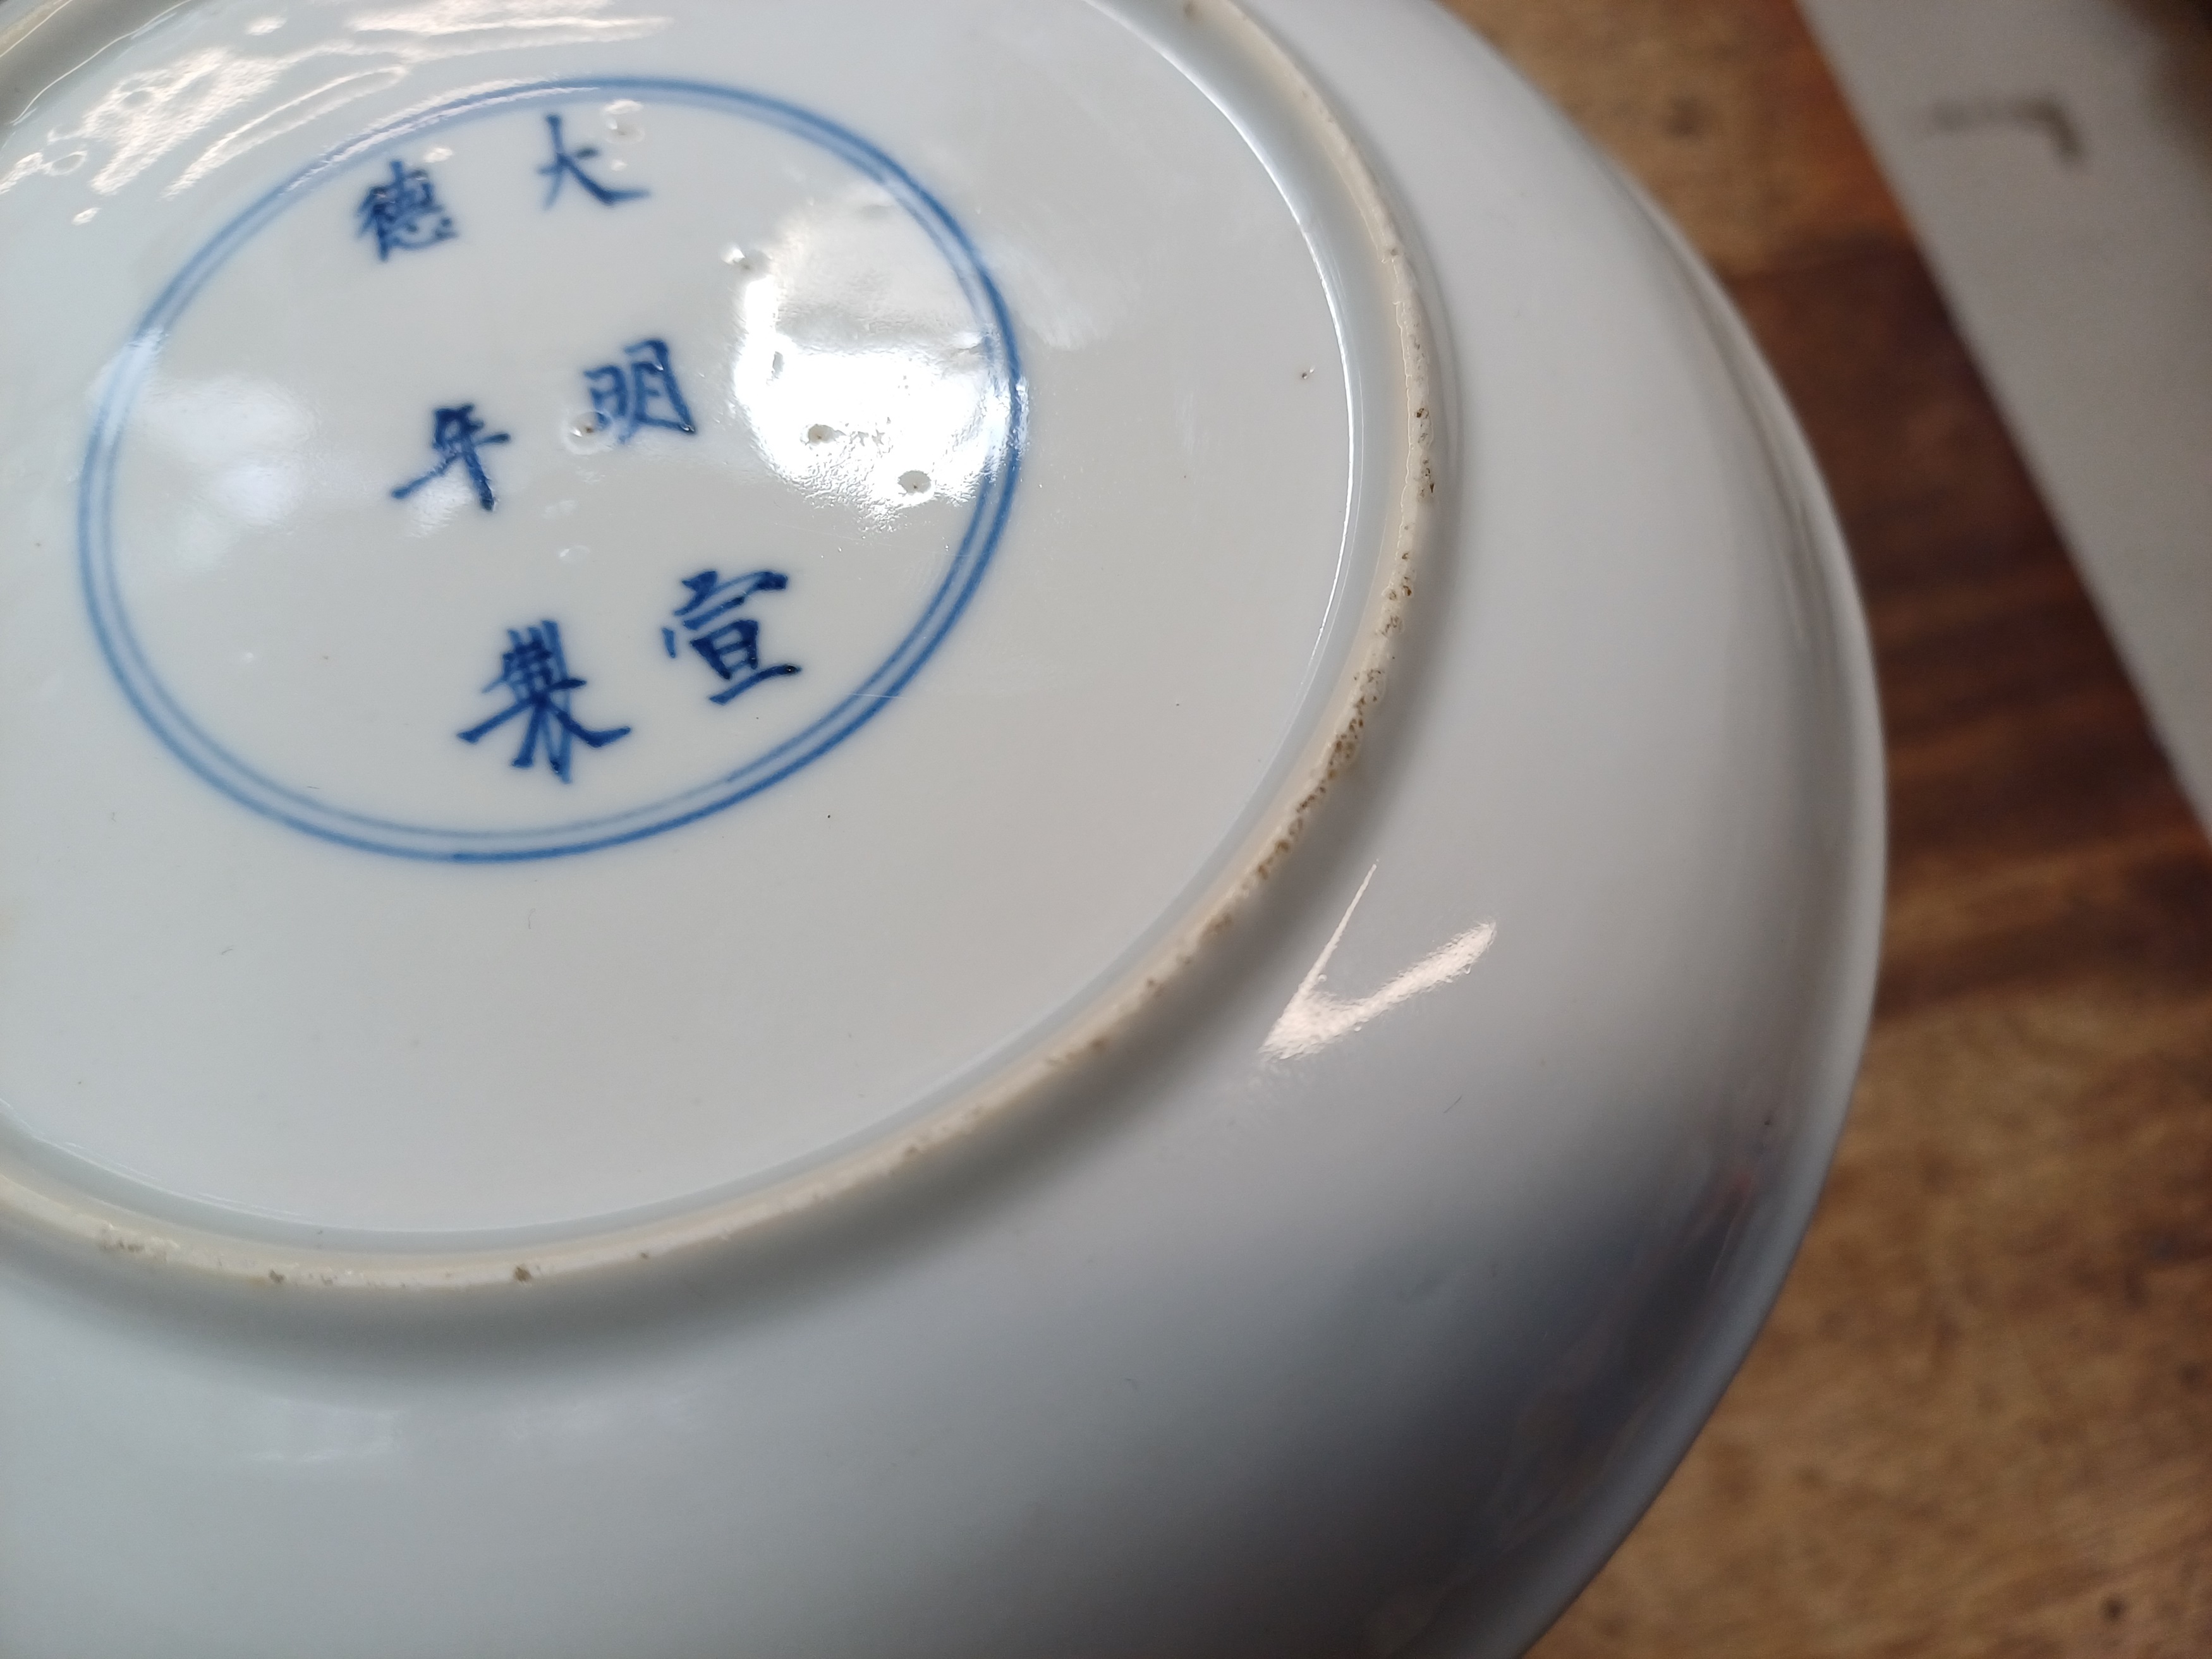 A RARE CHINESE BLUE AND WHITE AND COPPER-RED 'LOTUS AND EGRET' DISH 清康熙 青花釉裡紅一路連科圖盤 - Image 11 of 13